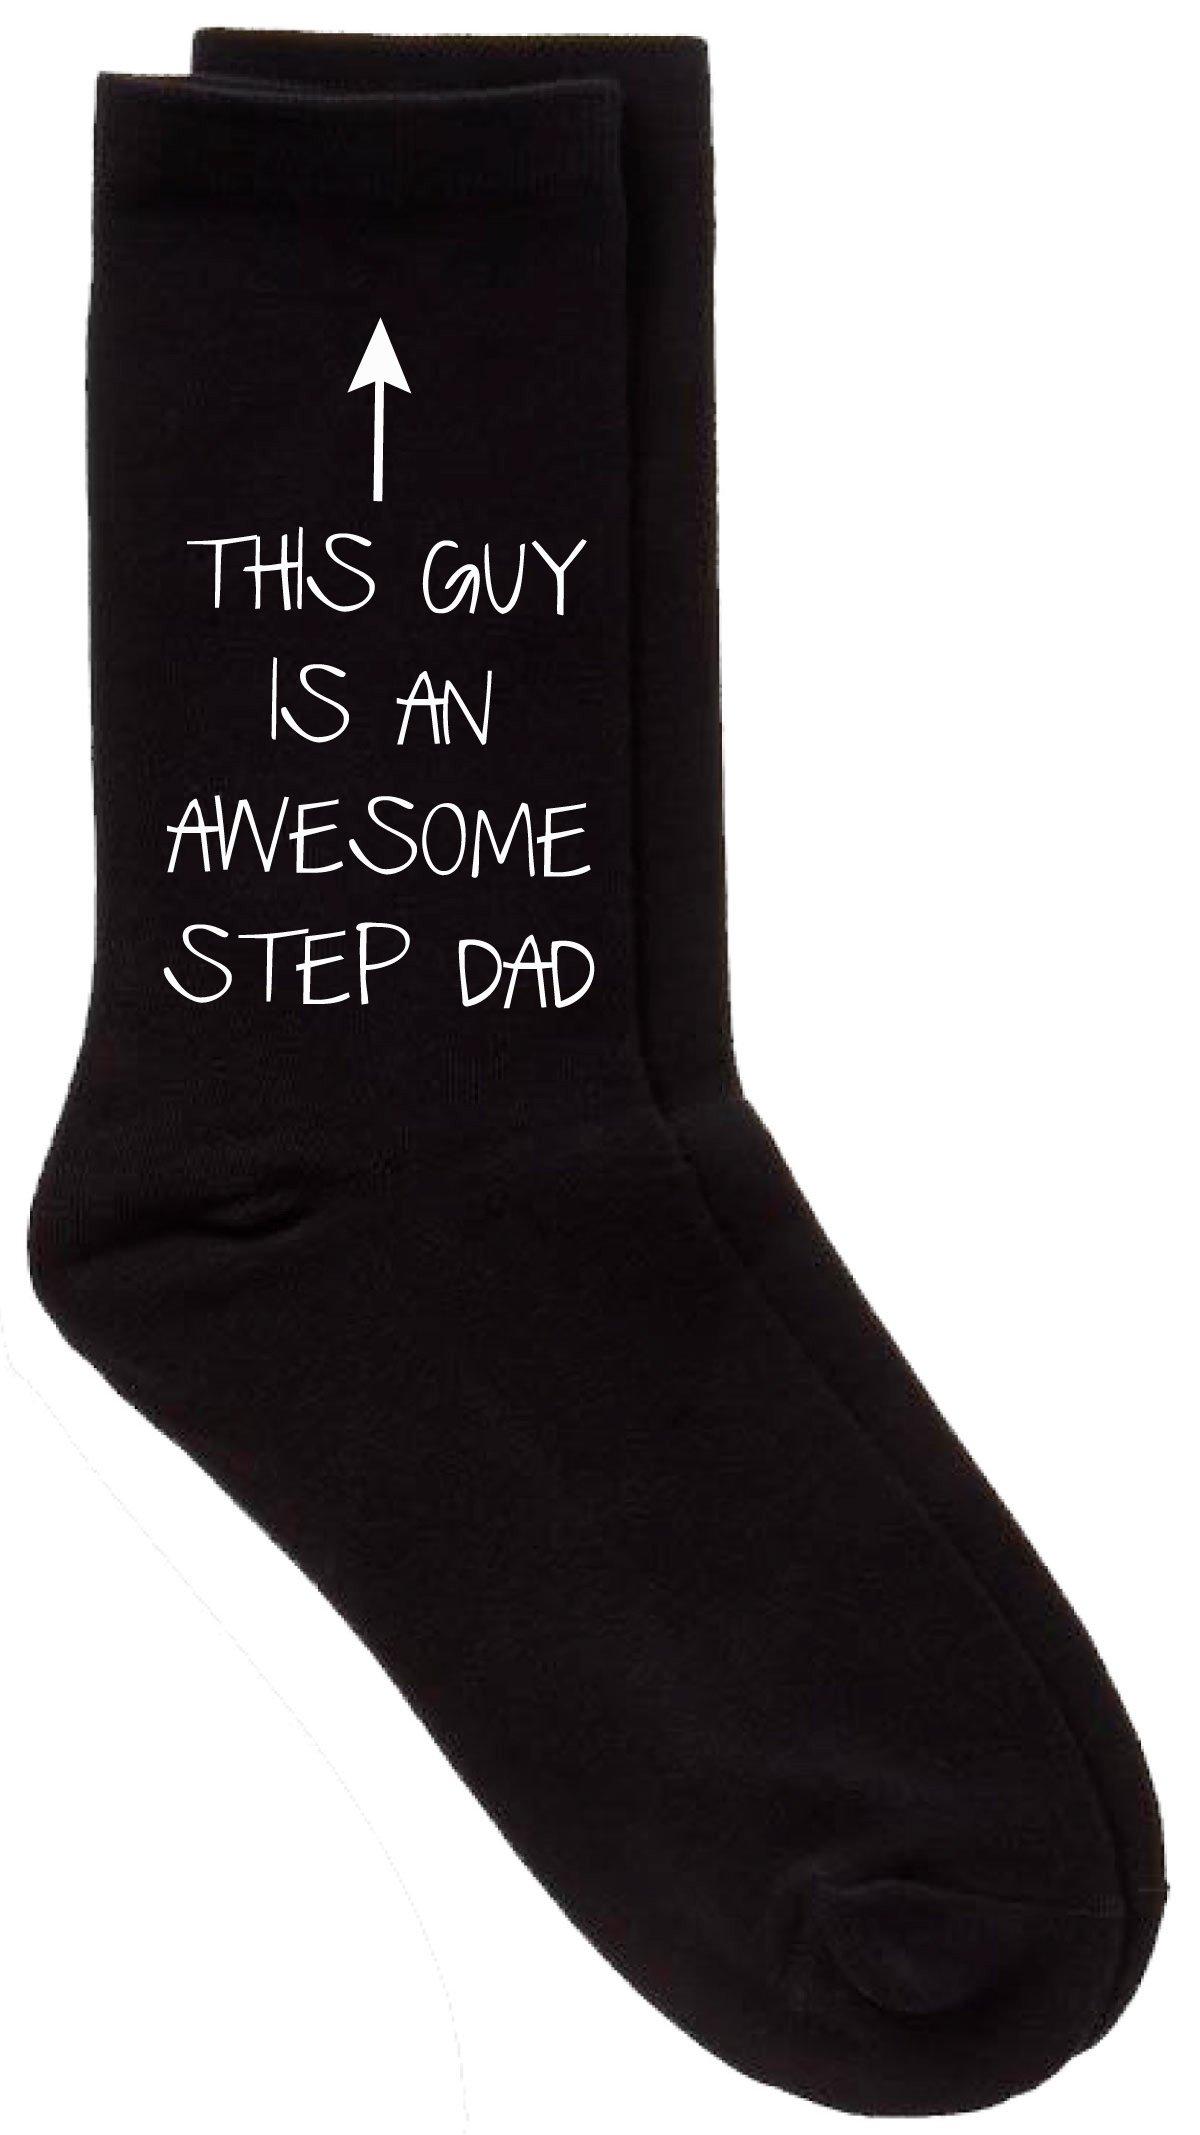 This Guy Is An Awesome Step Dad Mens Black Socks